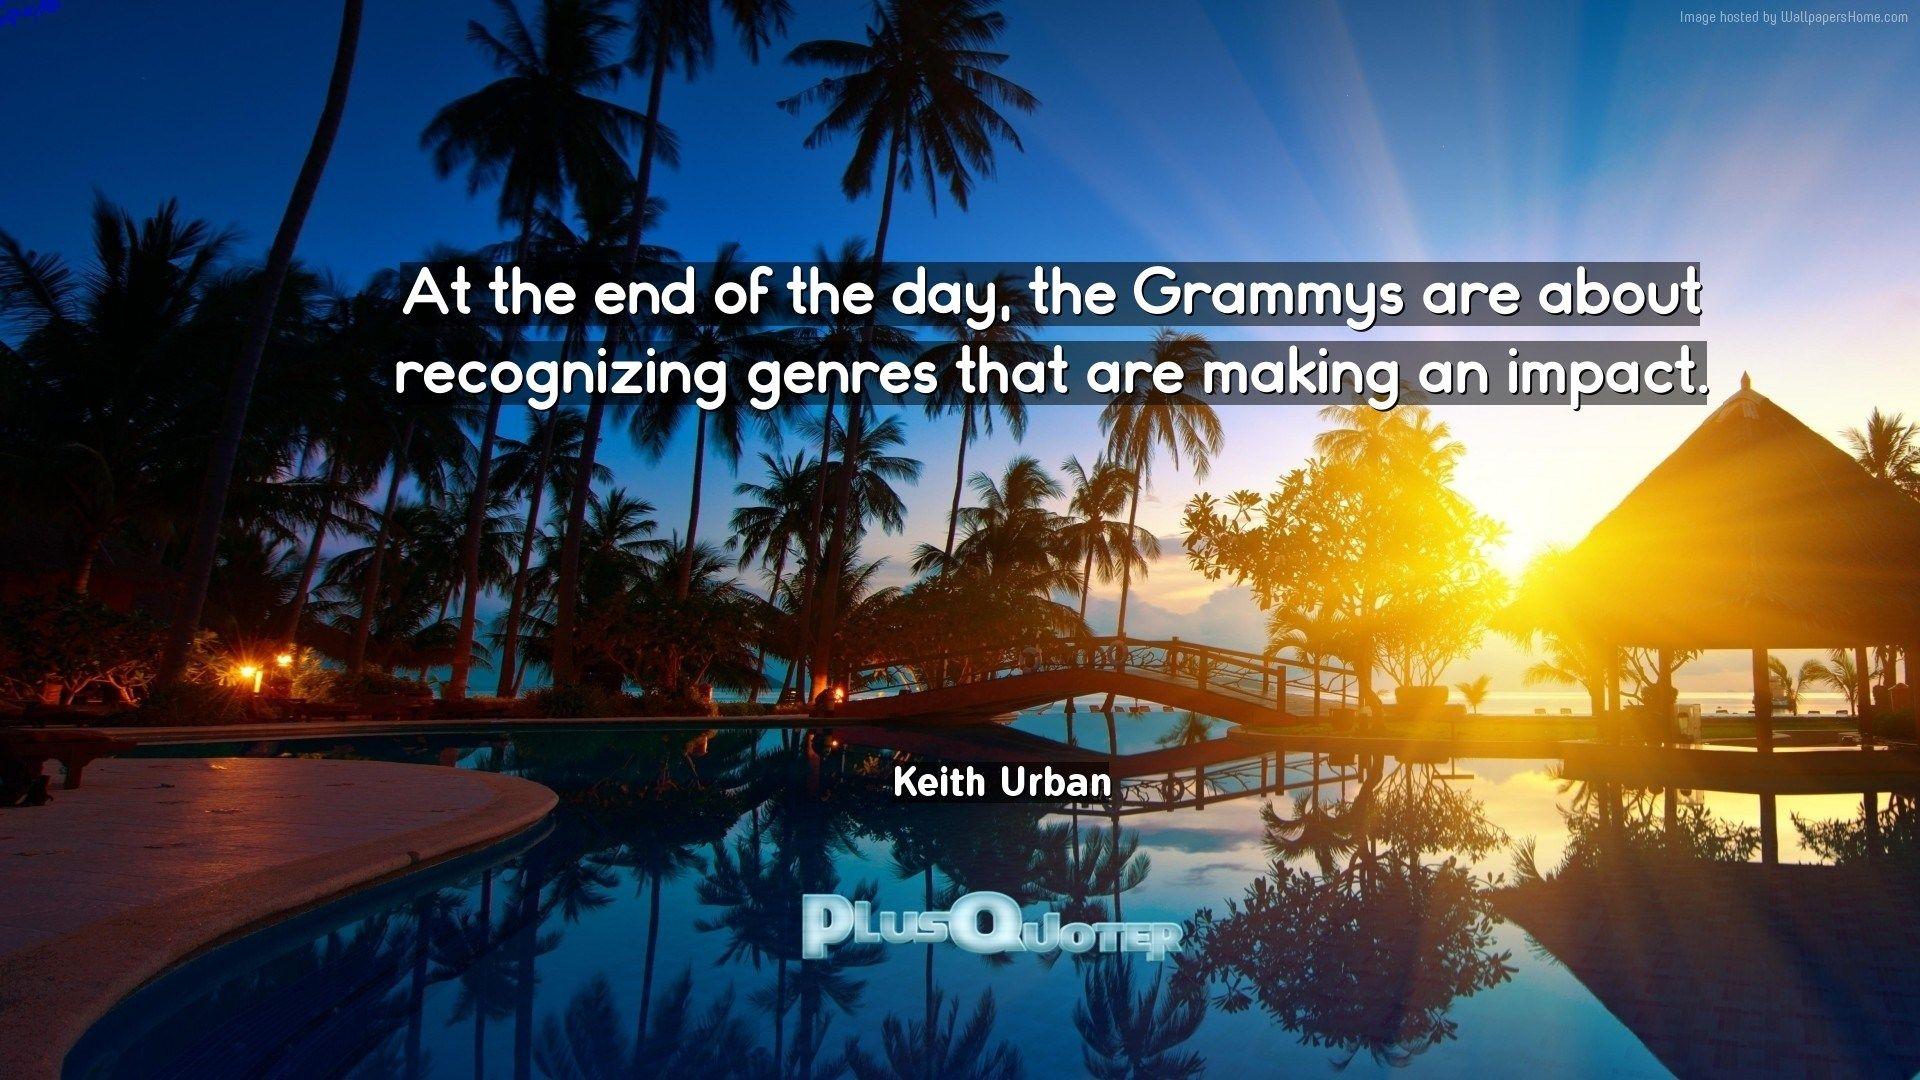 At the end of the day, the Grammys are about recognizing genres